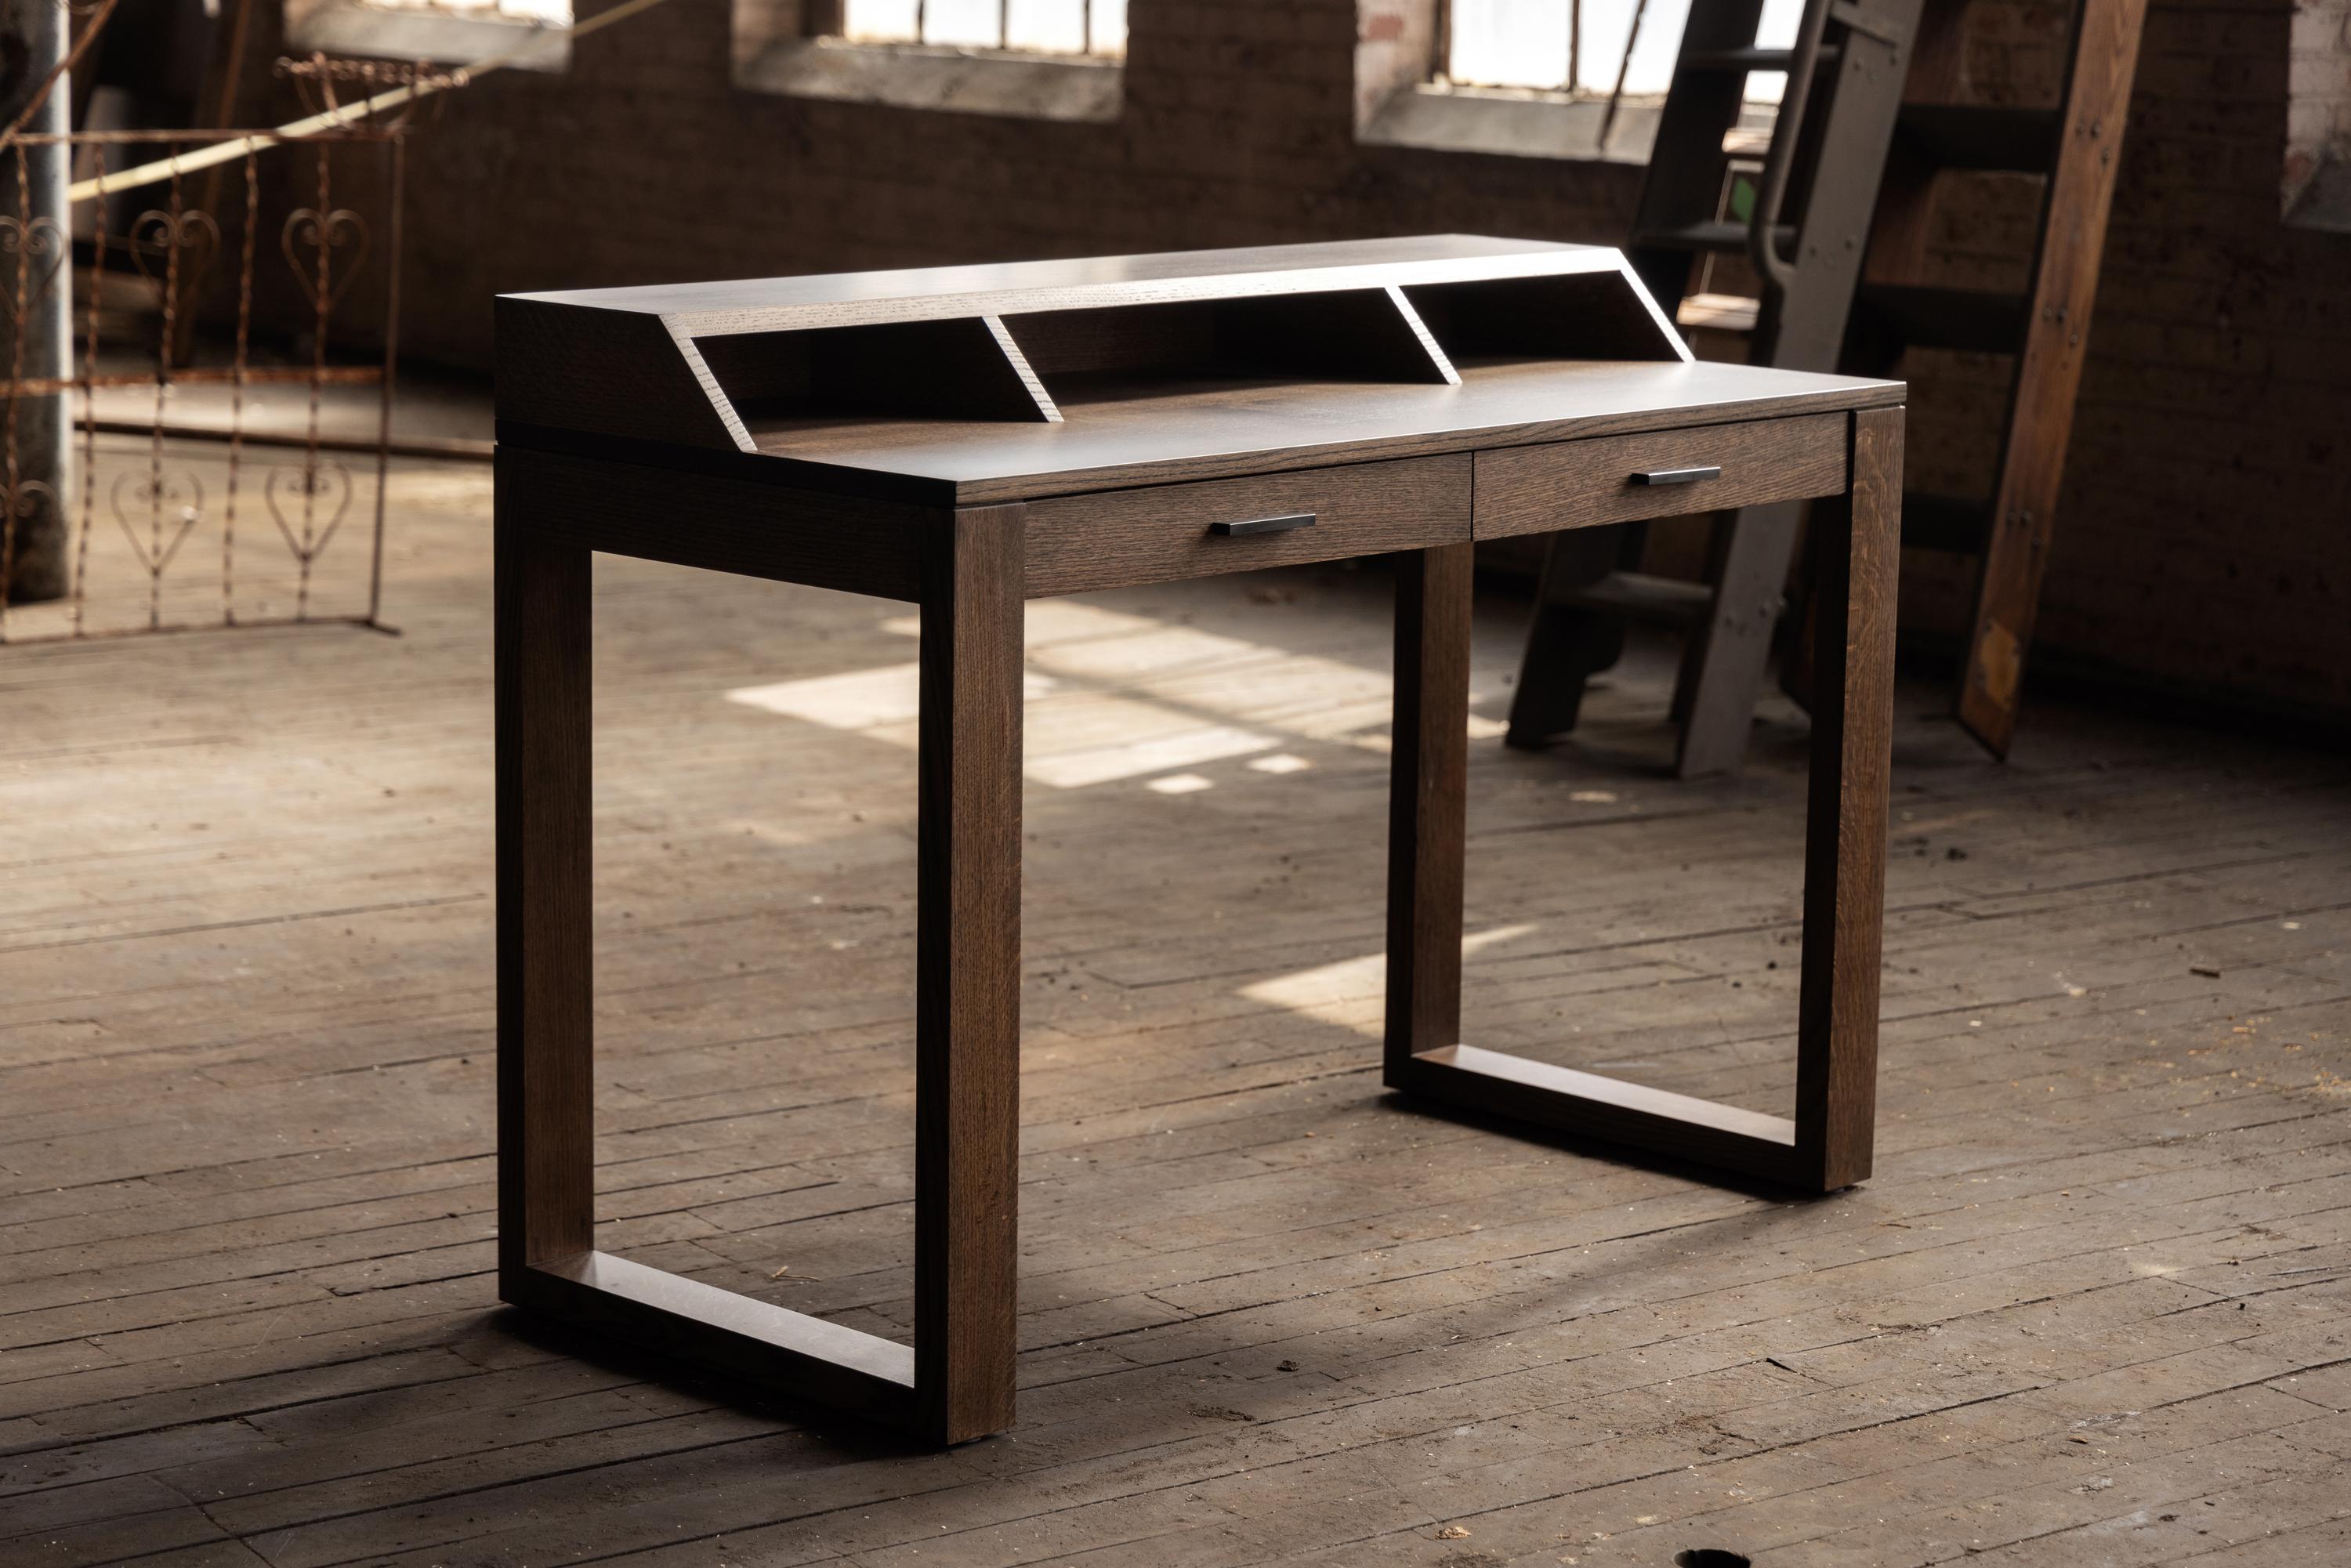 We handcrafted this classic writing desk with hardwoods from Birmingham's urban forest. For your home office, computer desk or a place to work from home, comfortable and focused on a novel or a grocery list. The writing desk offers a unique